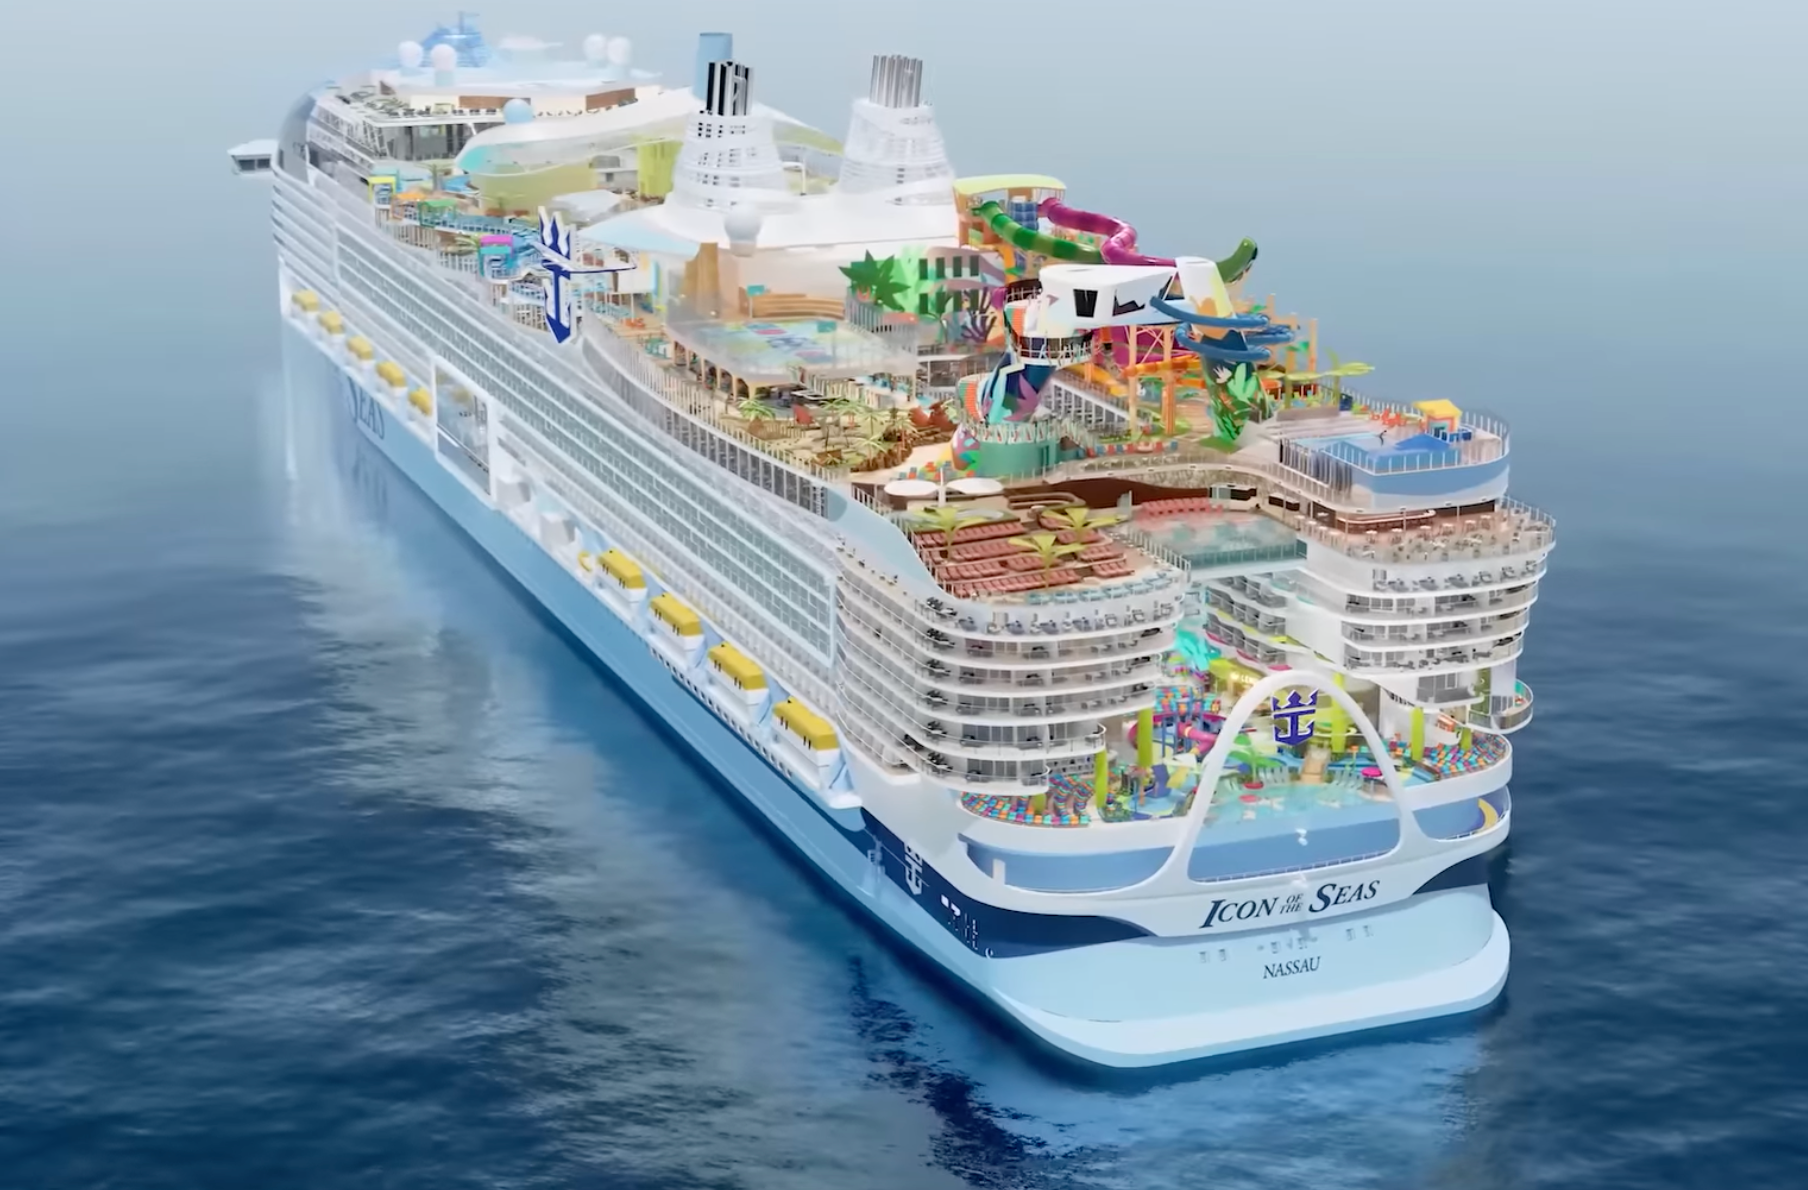 Come 2024, Royal Caribbean’s Icon of the Seas will be the largest cruise ship on the water